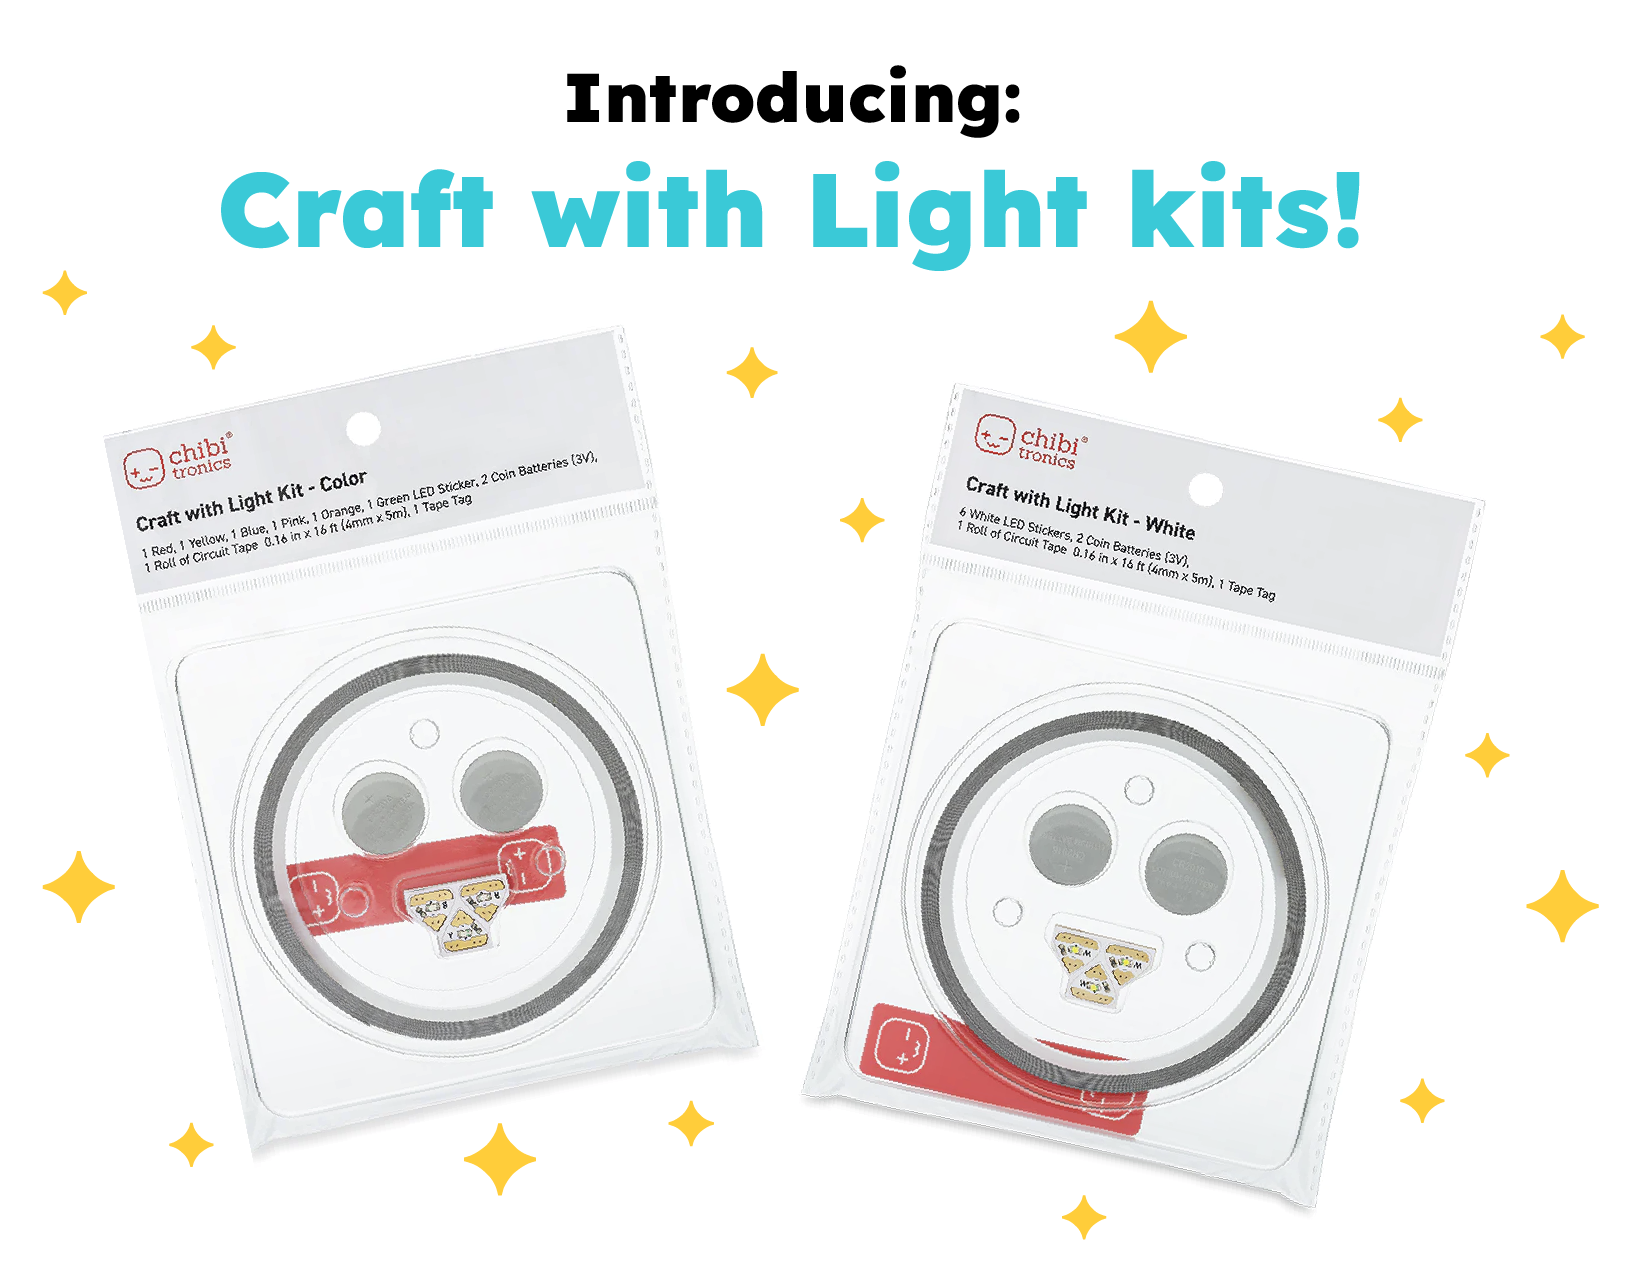 NEW PRODUCT: Craft with Light Kits!